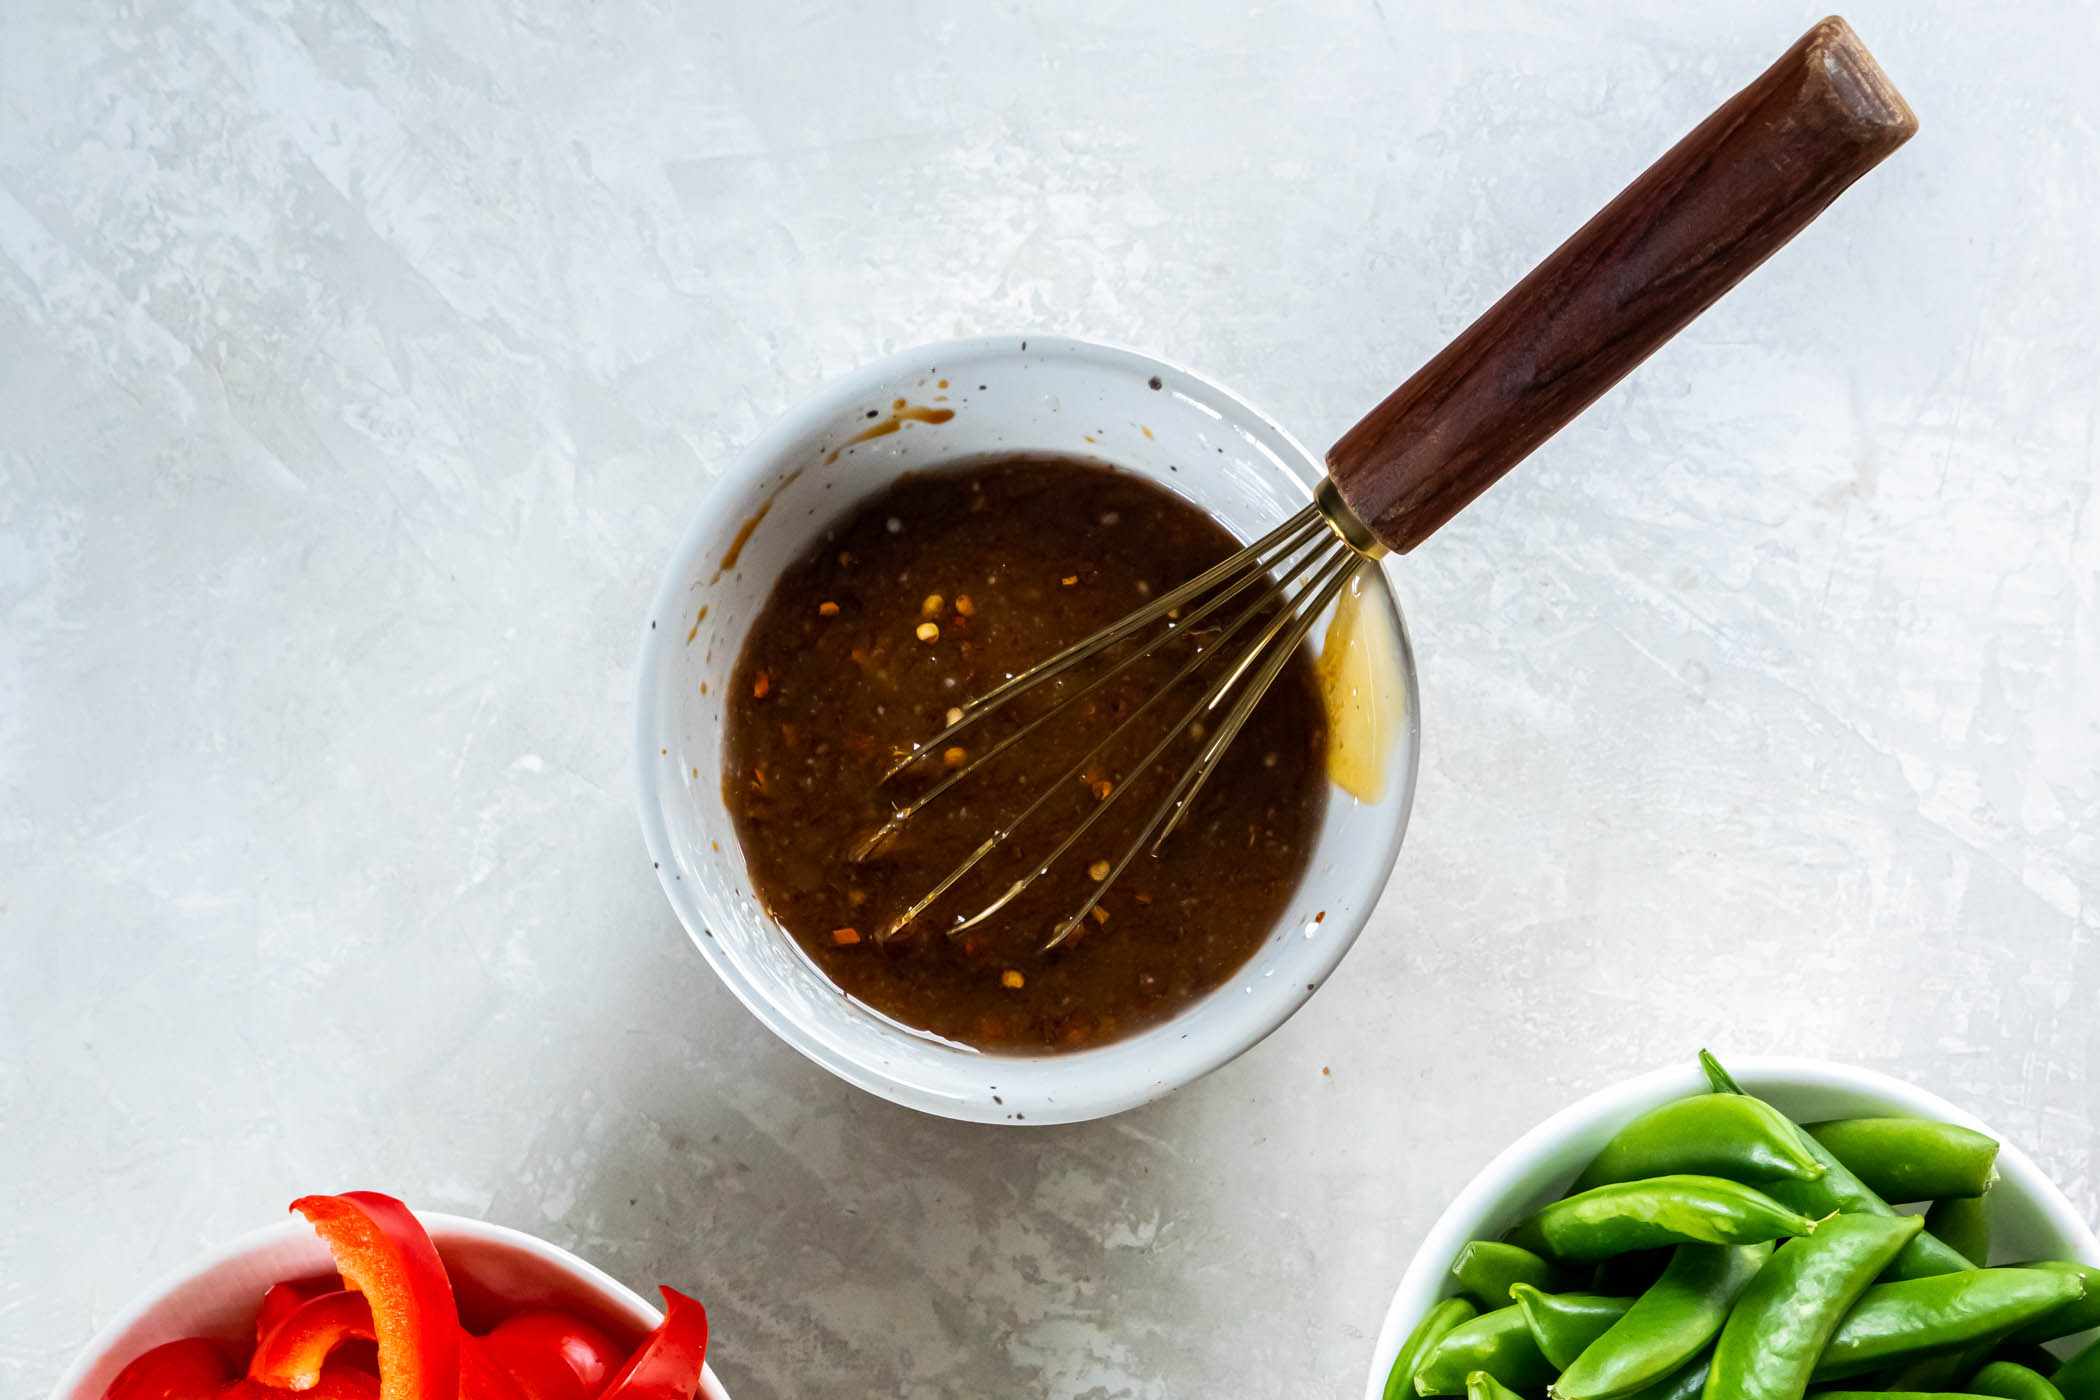 Stir fry sauce in a small bowl with a whisk.